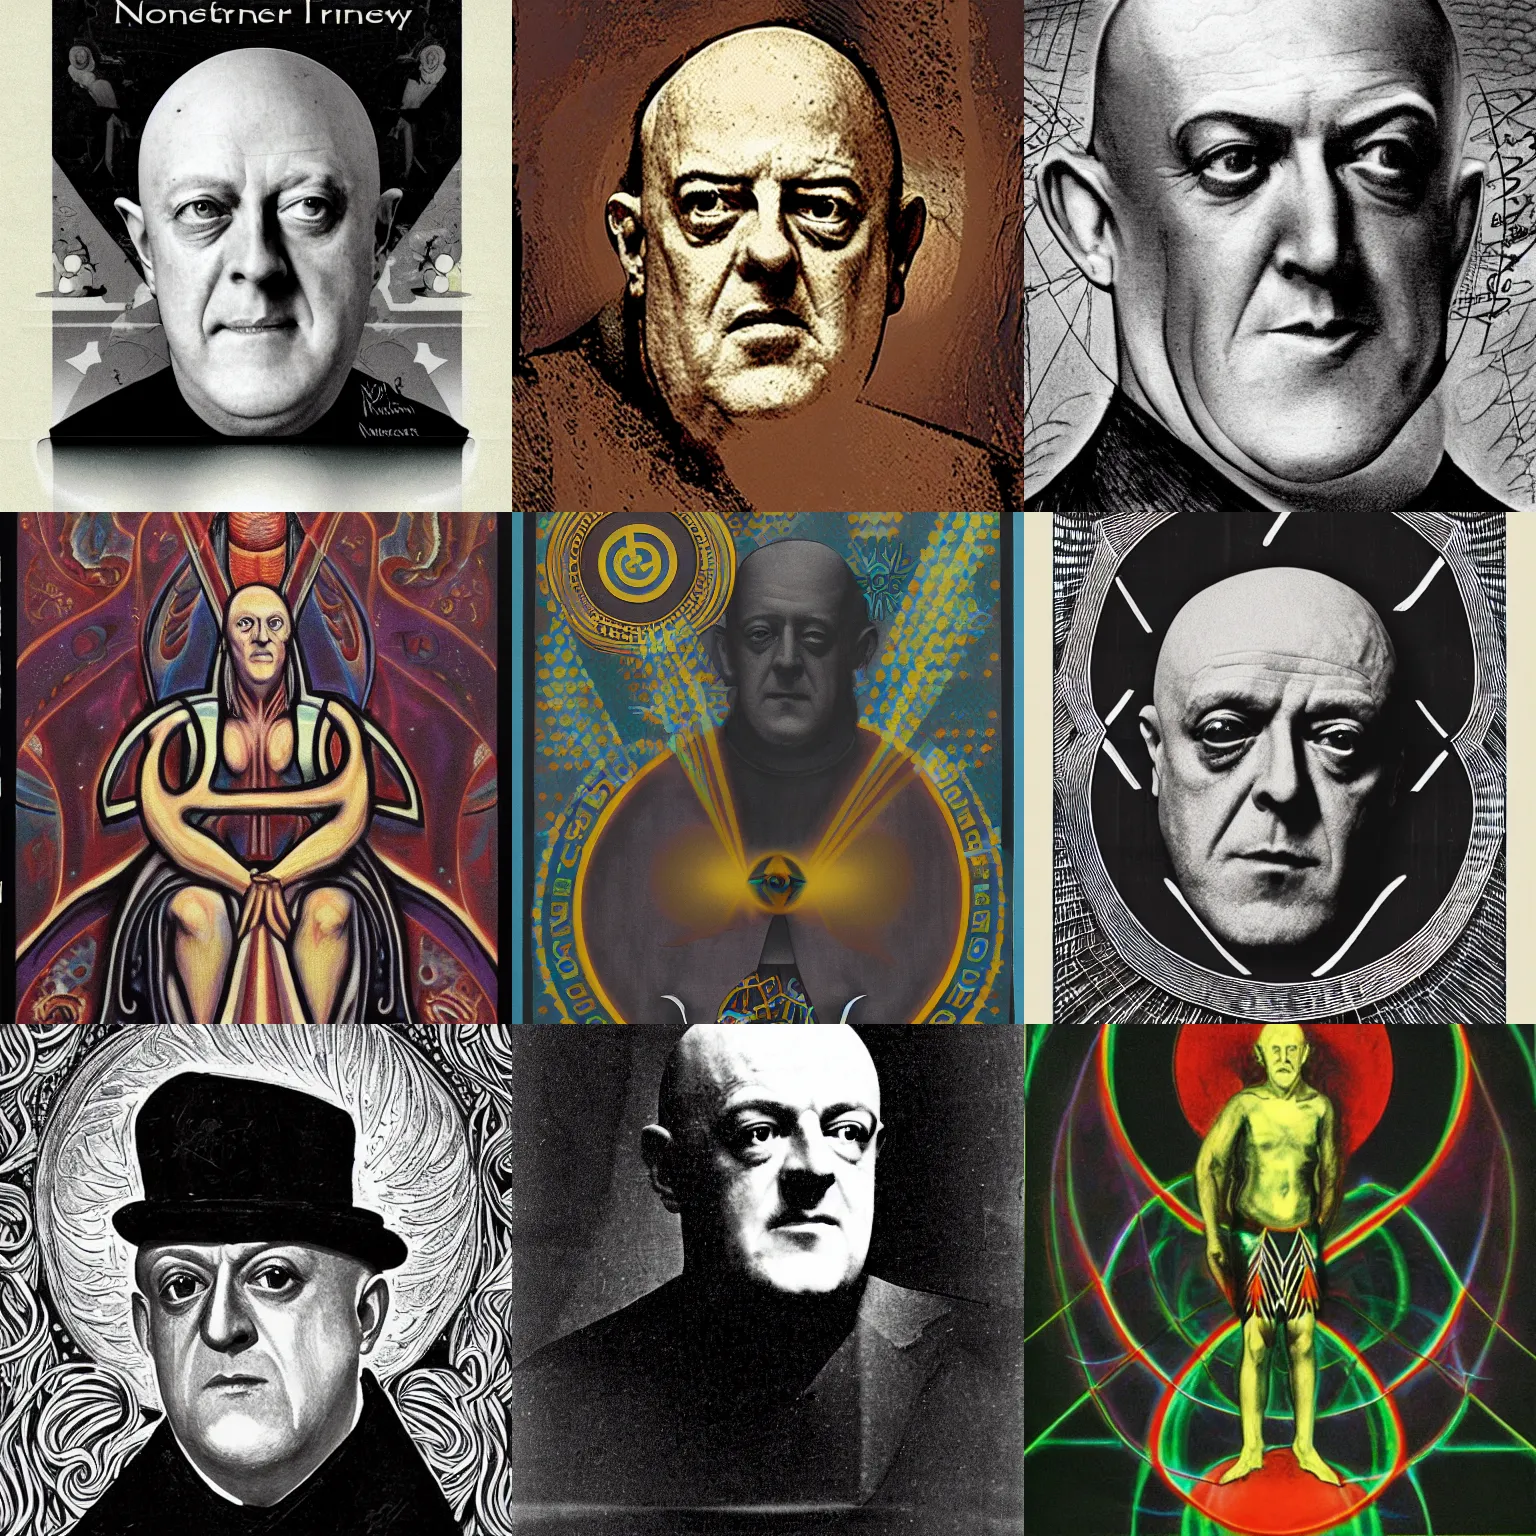 Prompt: the nonlinear by aleister crowley